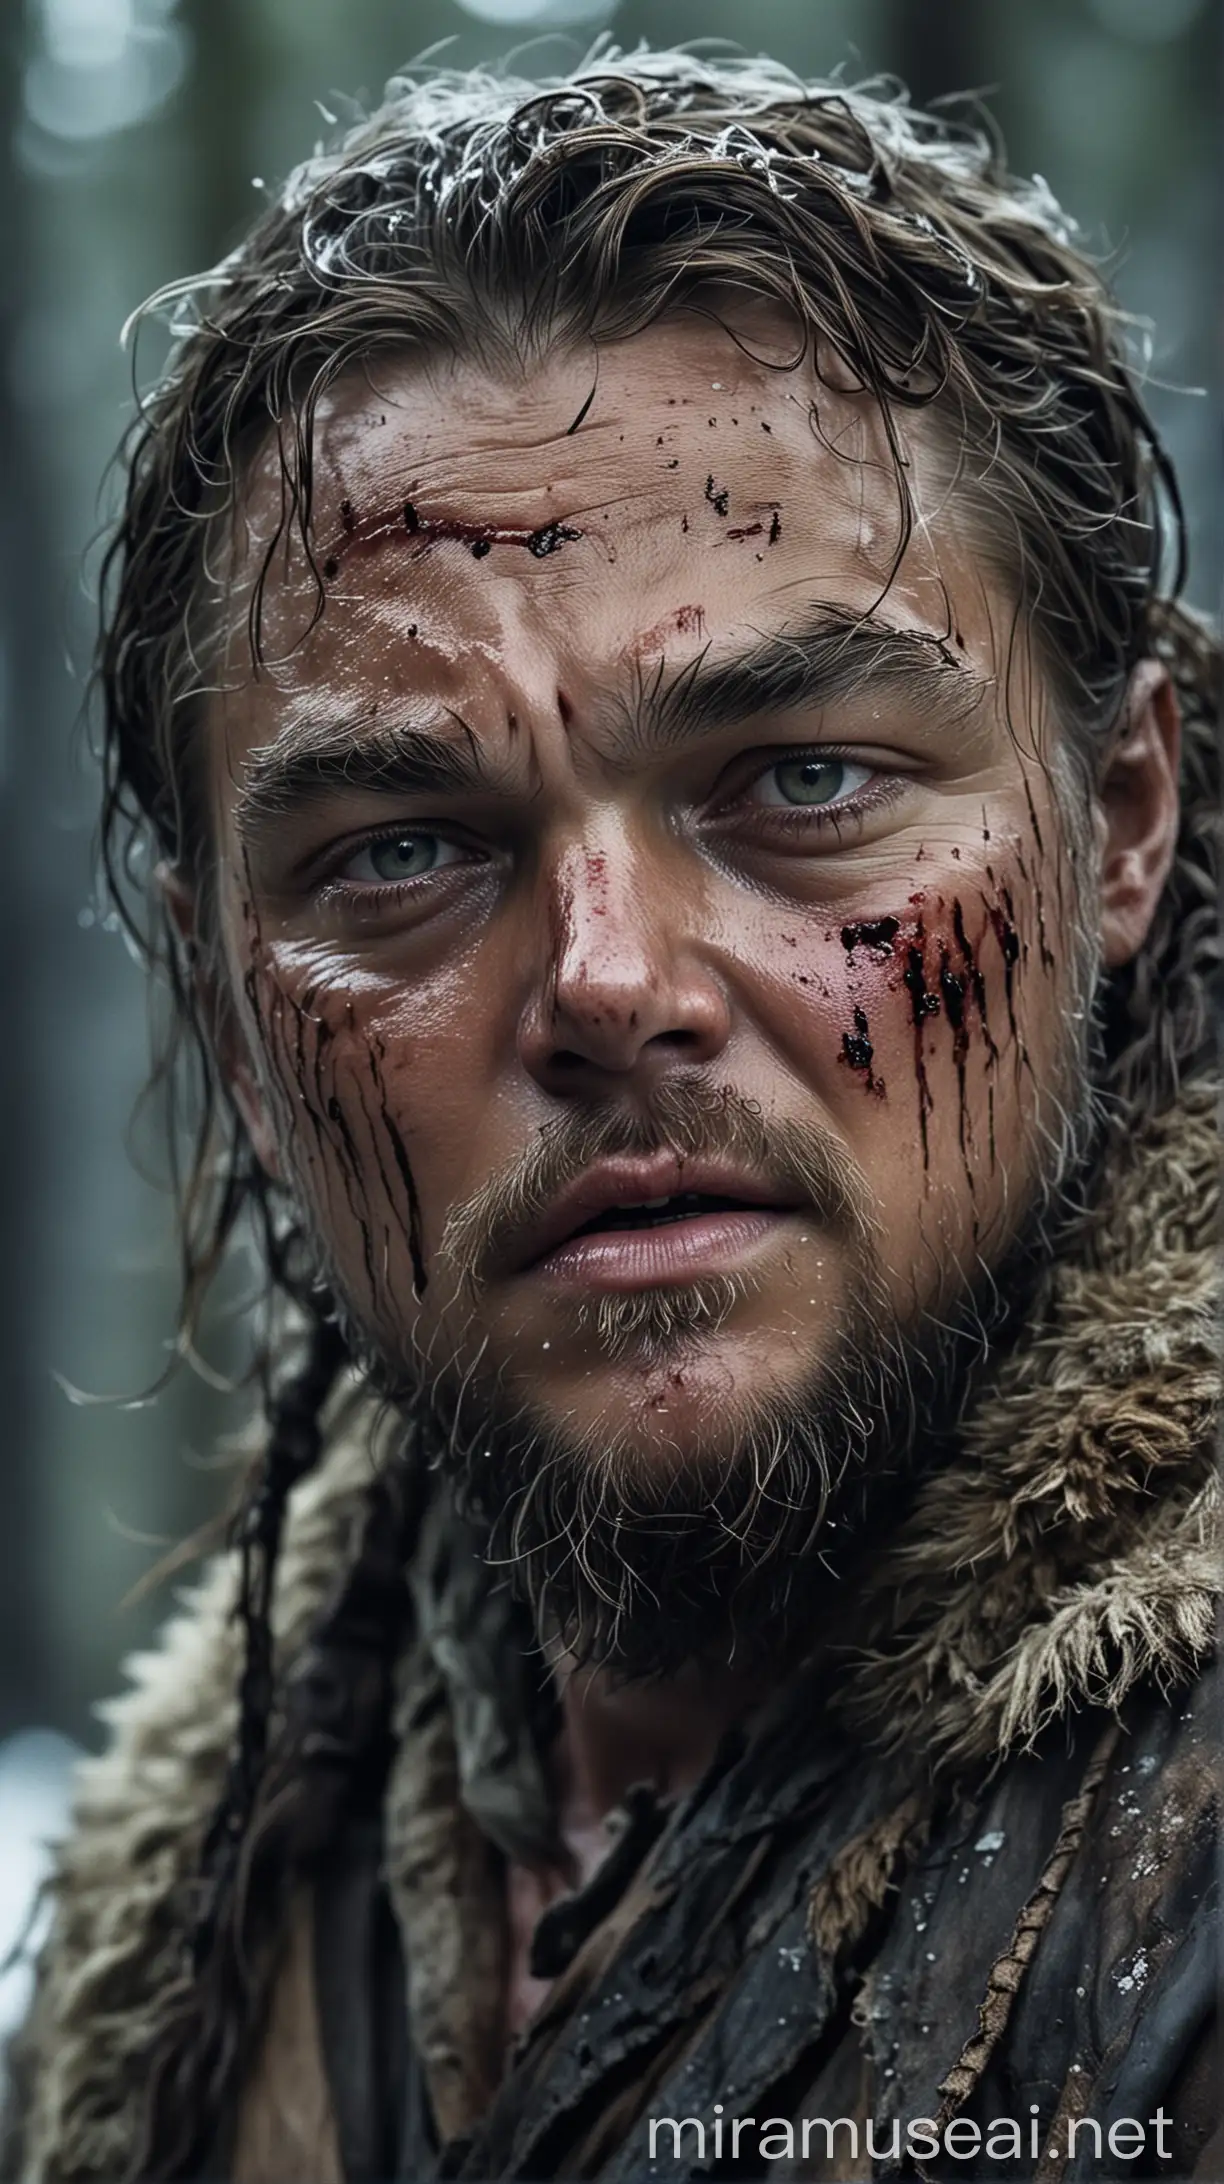 A dramatic image of leonardo DiCaprio in character as hugh glass from The Revenant ,bloody and battered in the wilderness